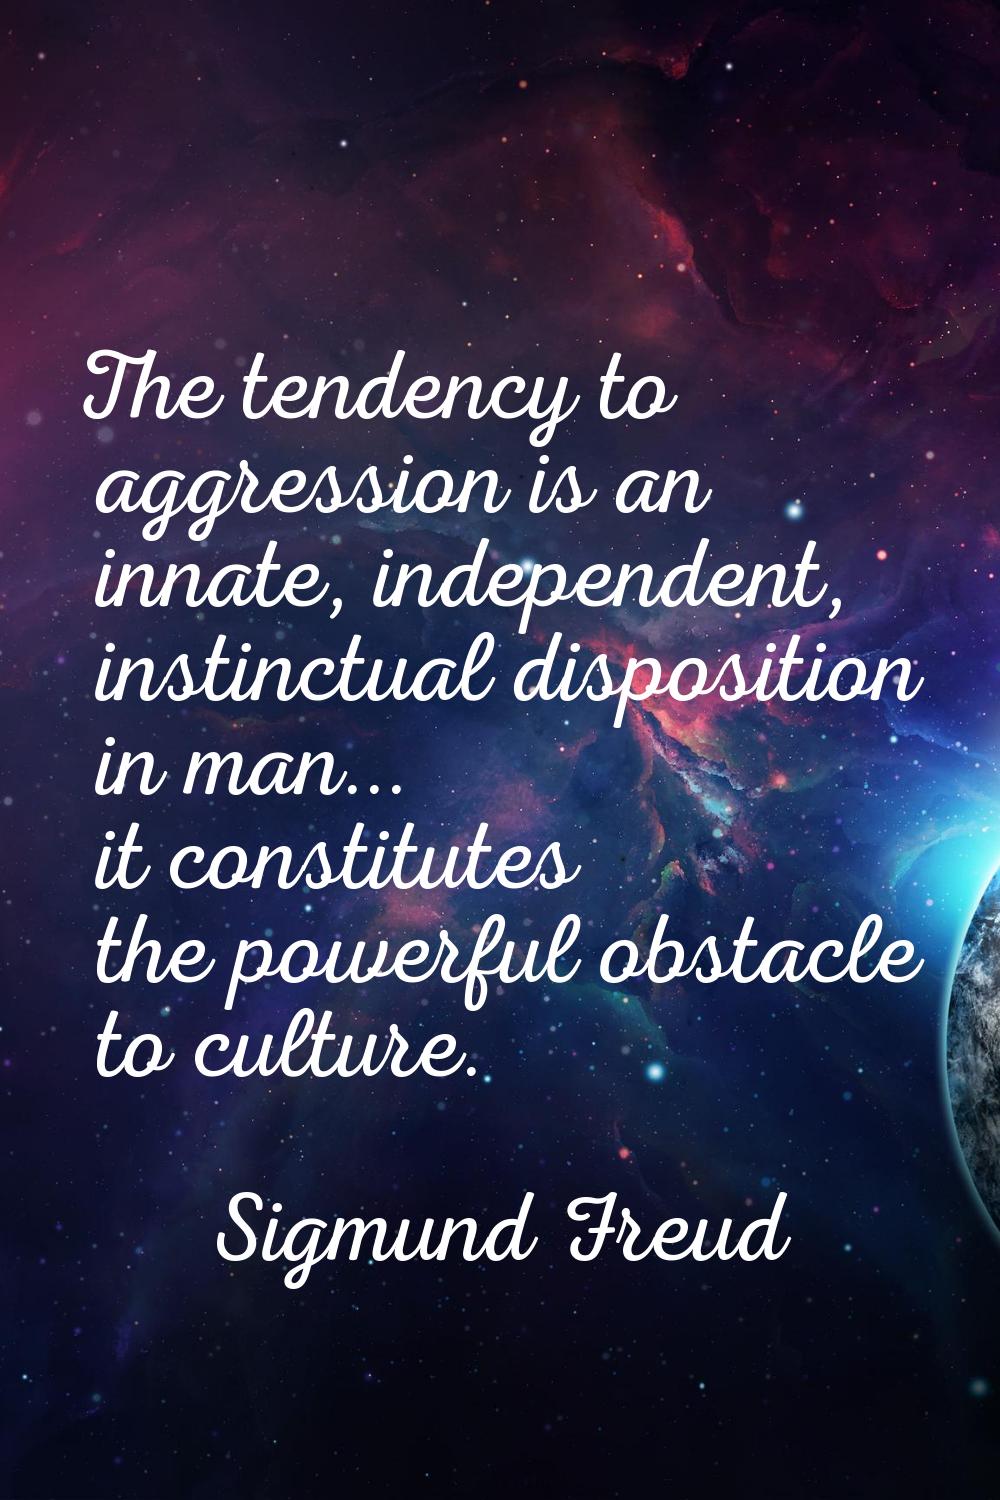 The tendency to aggression is an innate, independent, instinctual disposition in man... it constitu